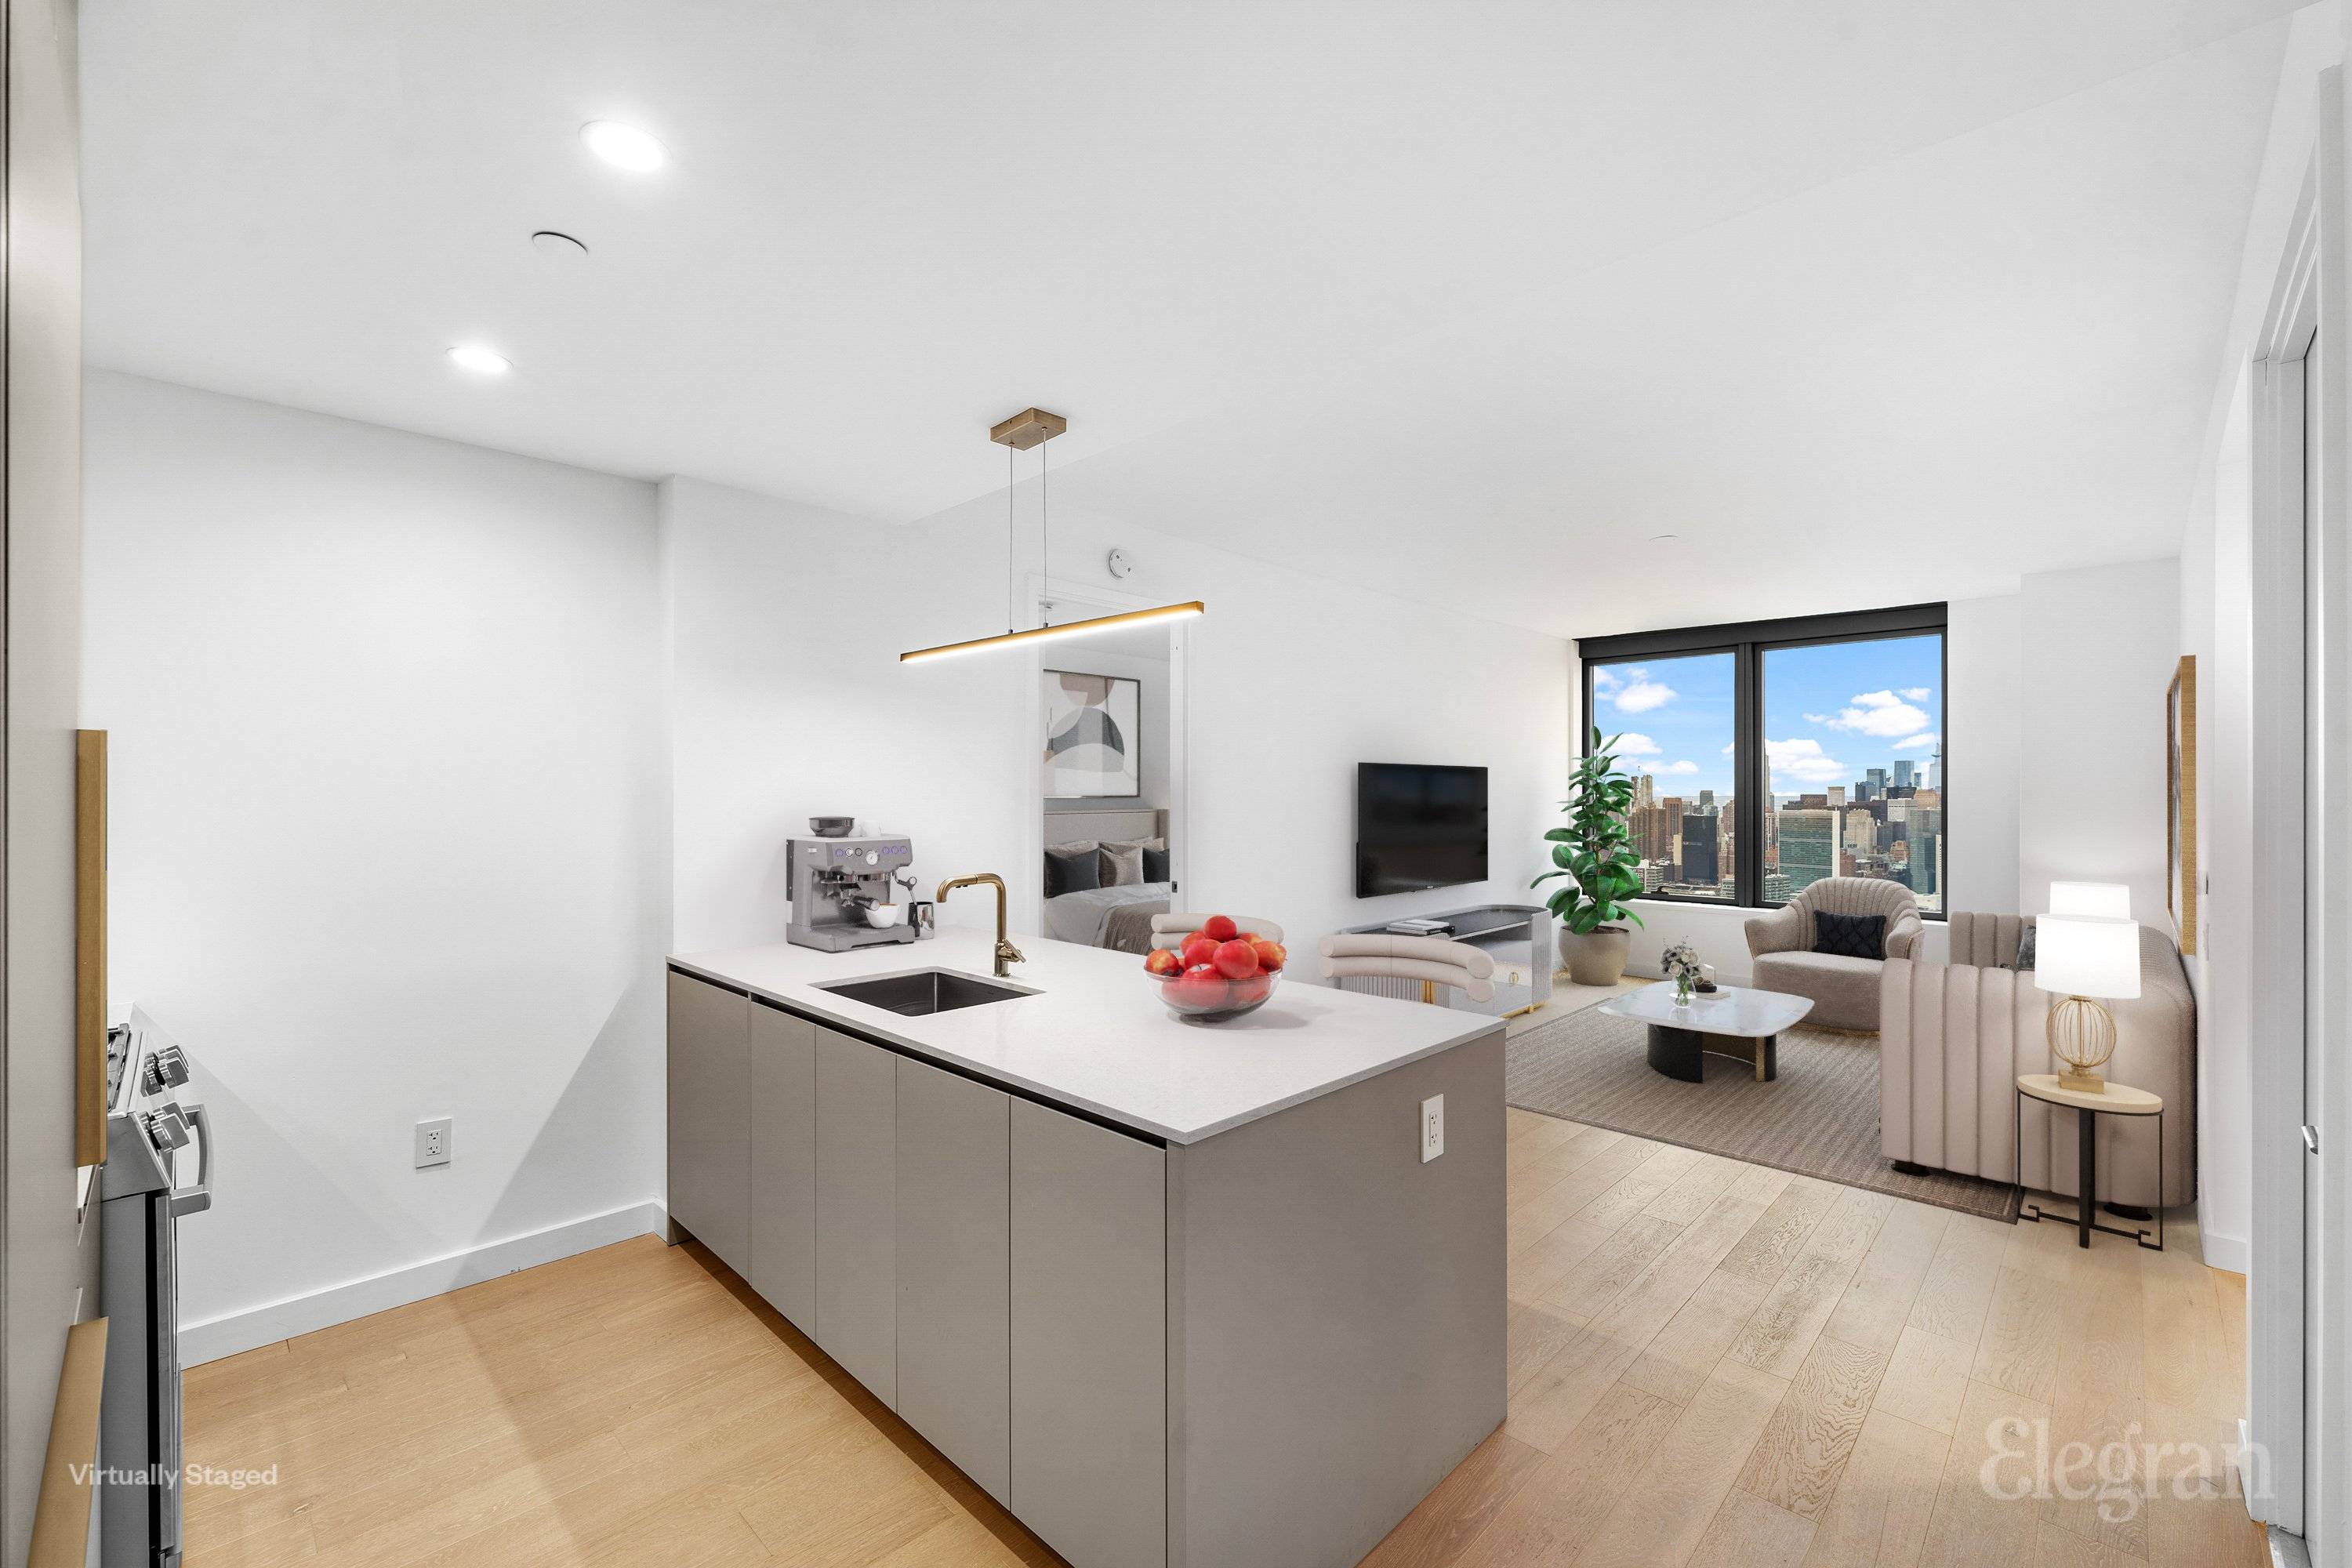 Why Unit 5801 Stunning Panoramic Manhattan Skyline and East River Views throughout every room.